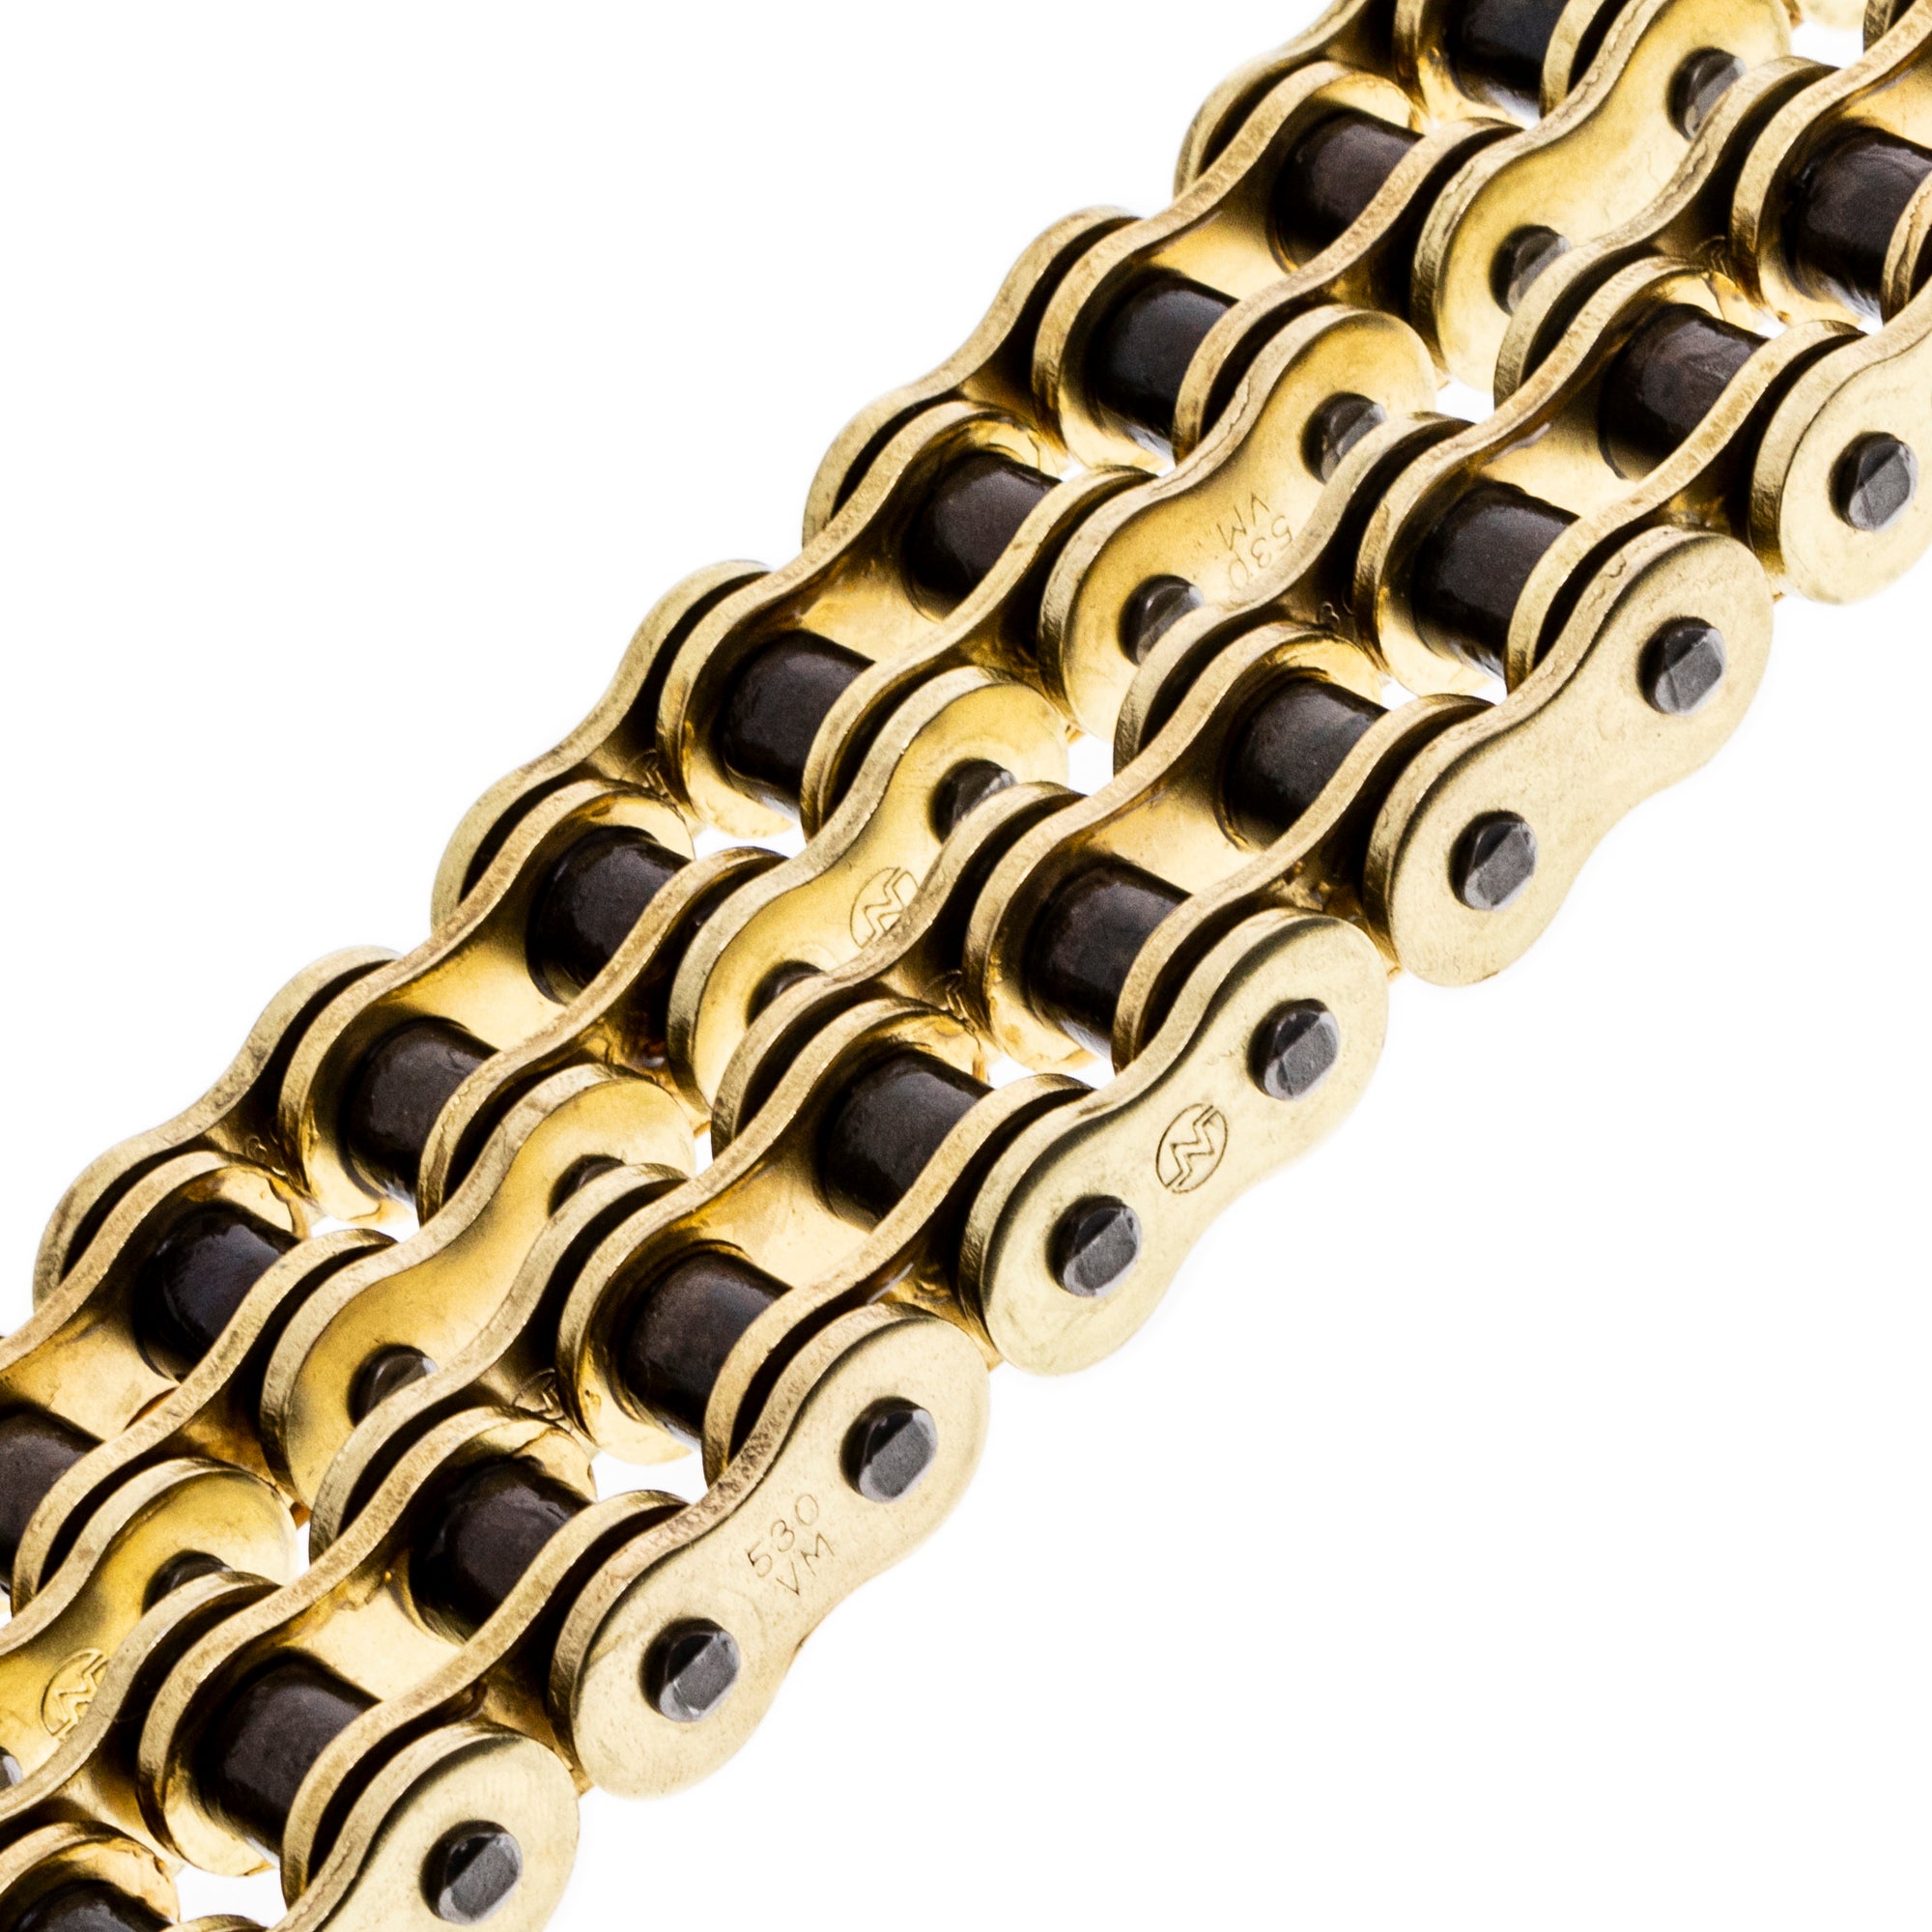 Gold X-Ring Chain 88 w/ Master Link for zOTHER Nighthawk 5502 NICHE 519-CDC2513H